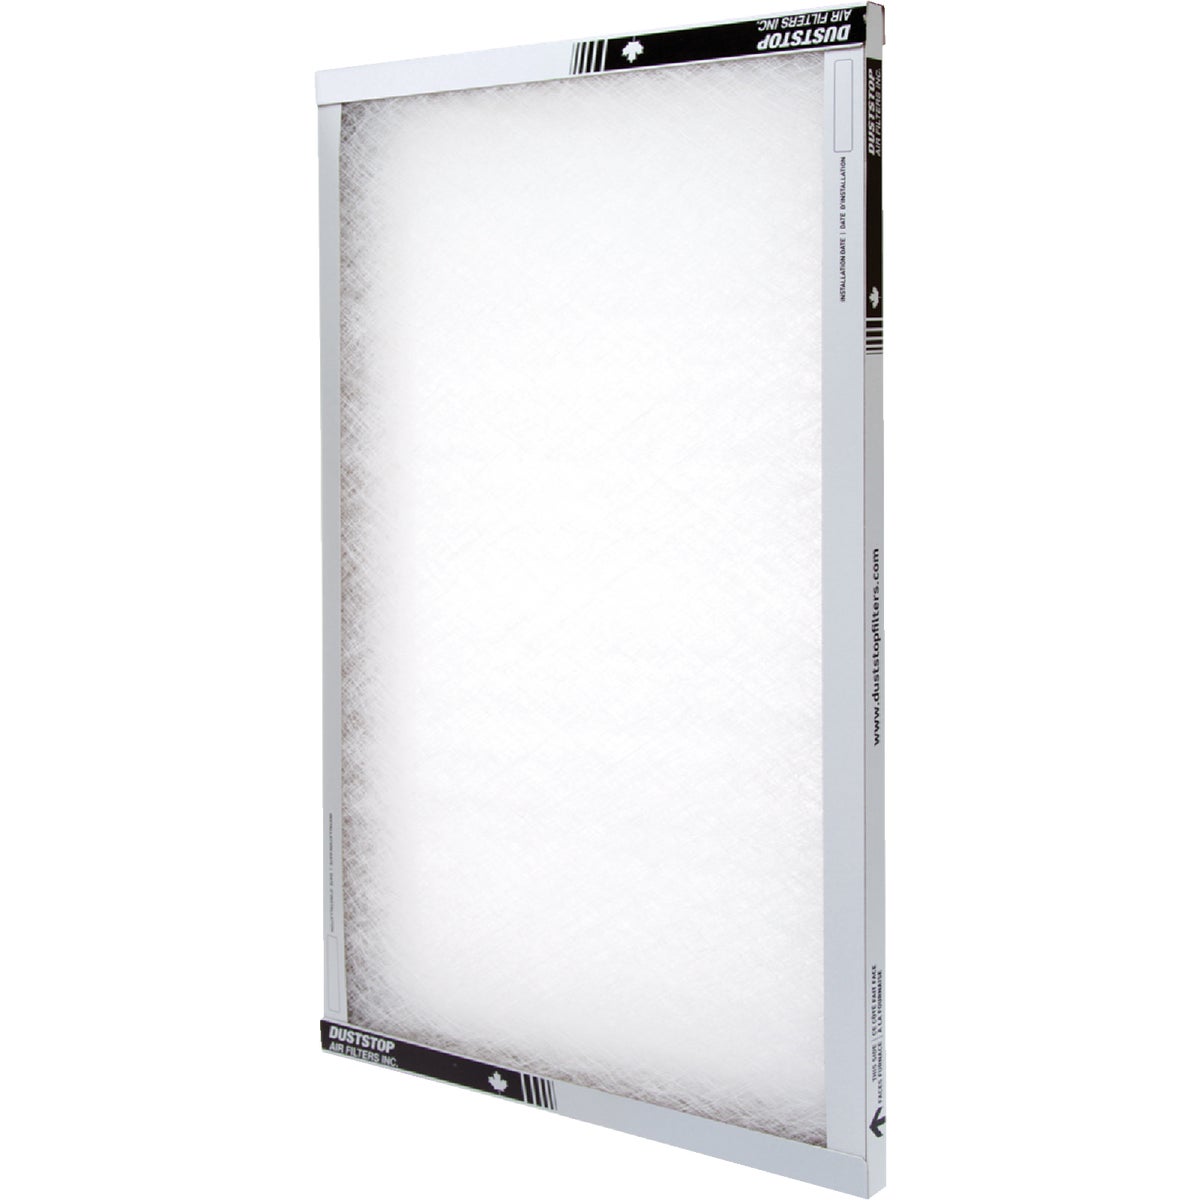 Item 408223, Standard grade furnace filter with a filtering medium of continuous 